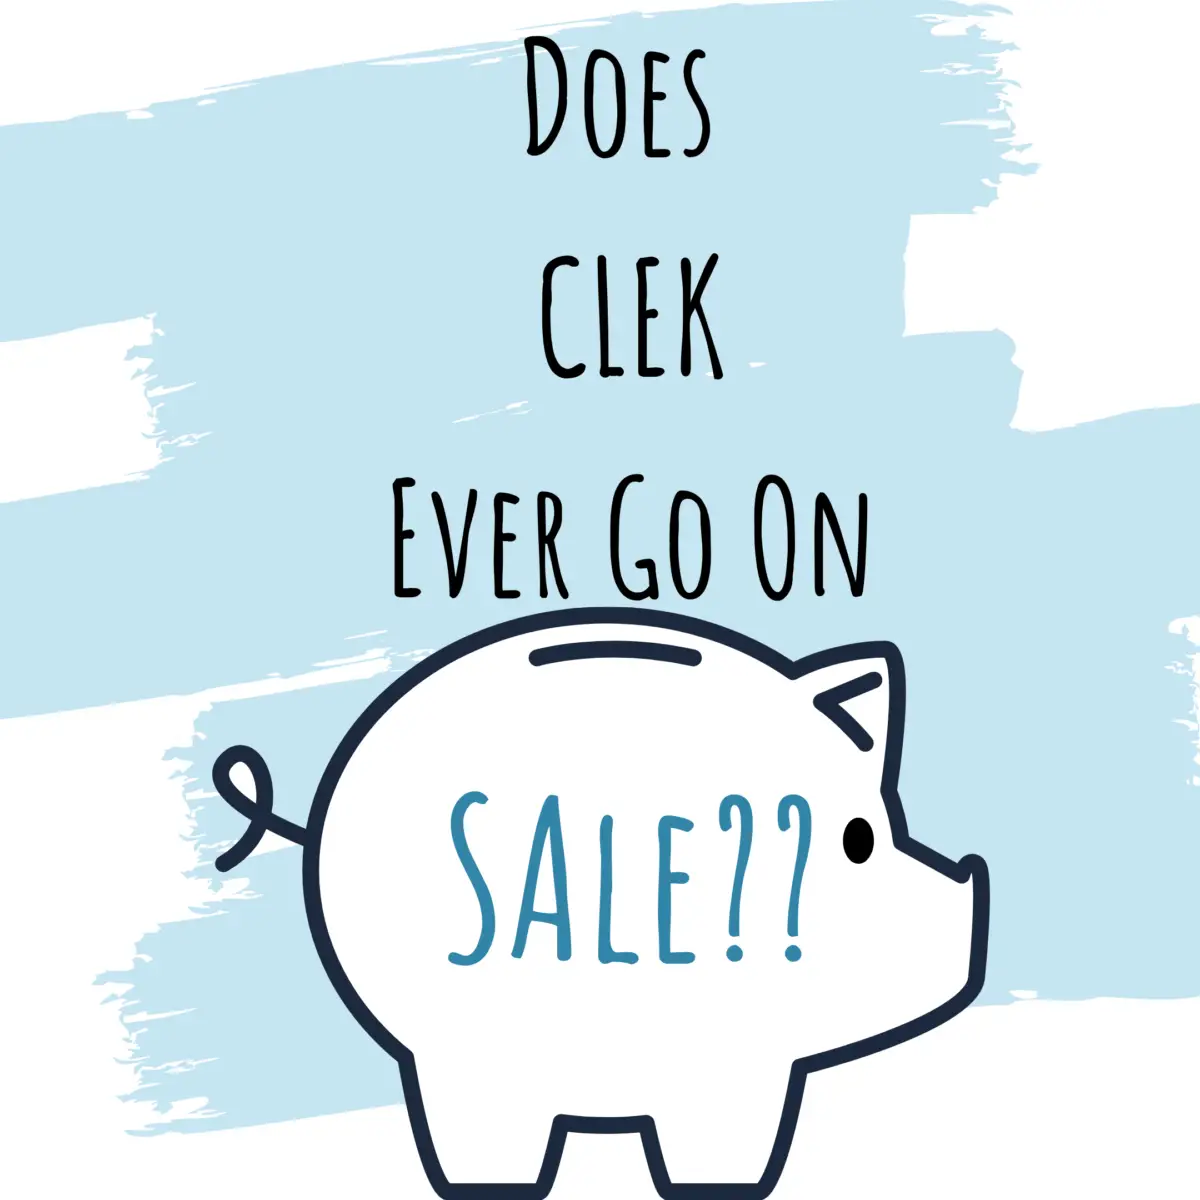 Does Clek ever go on sale?